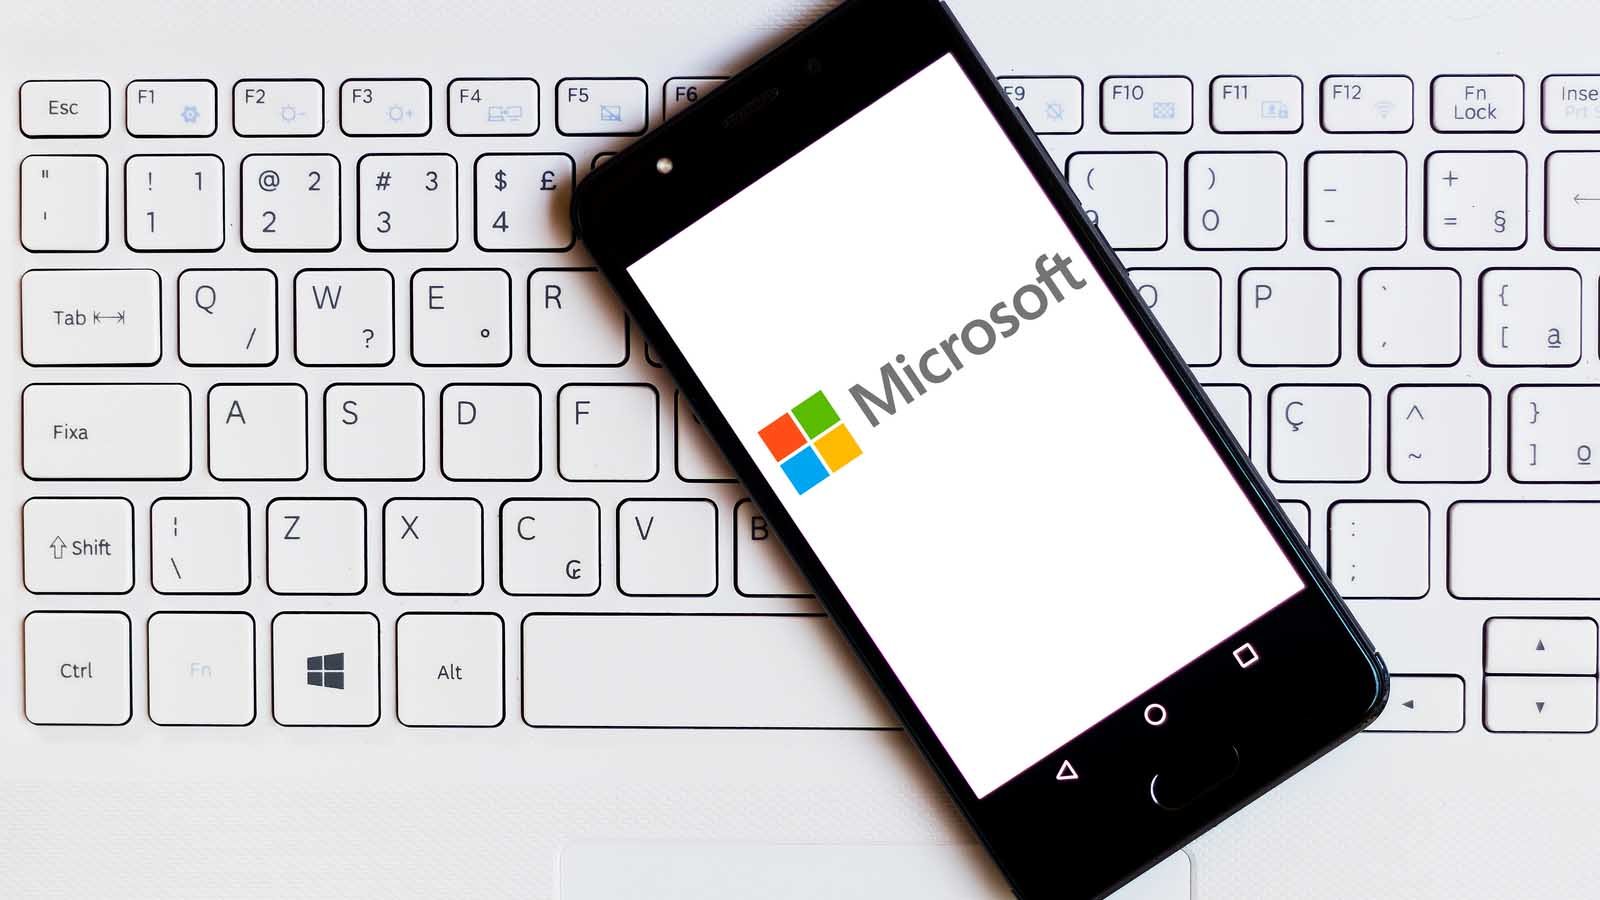 the Microsoft (MSFT) logo displayed on smartphone which is laying on top of a keyboard. symbolizes MSFT stock and blue-chip stocks